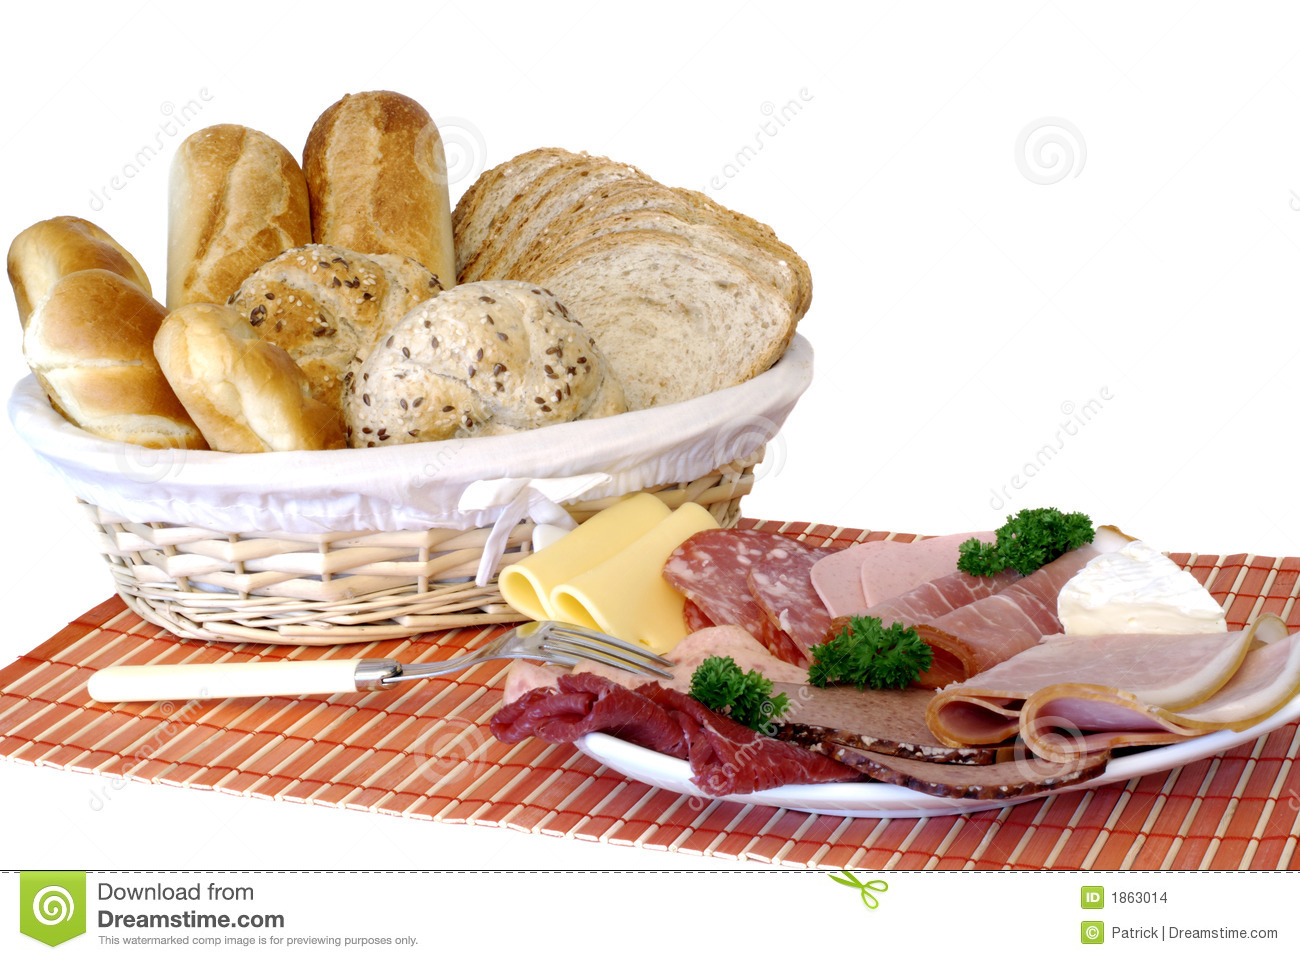 Breakfast Fresh Baked Bread Cheese And Meat Stock Images   Image    